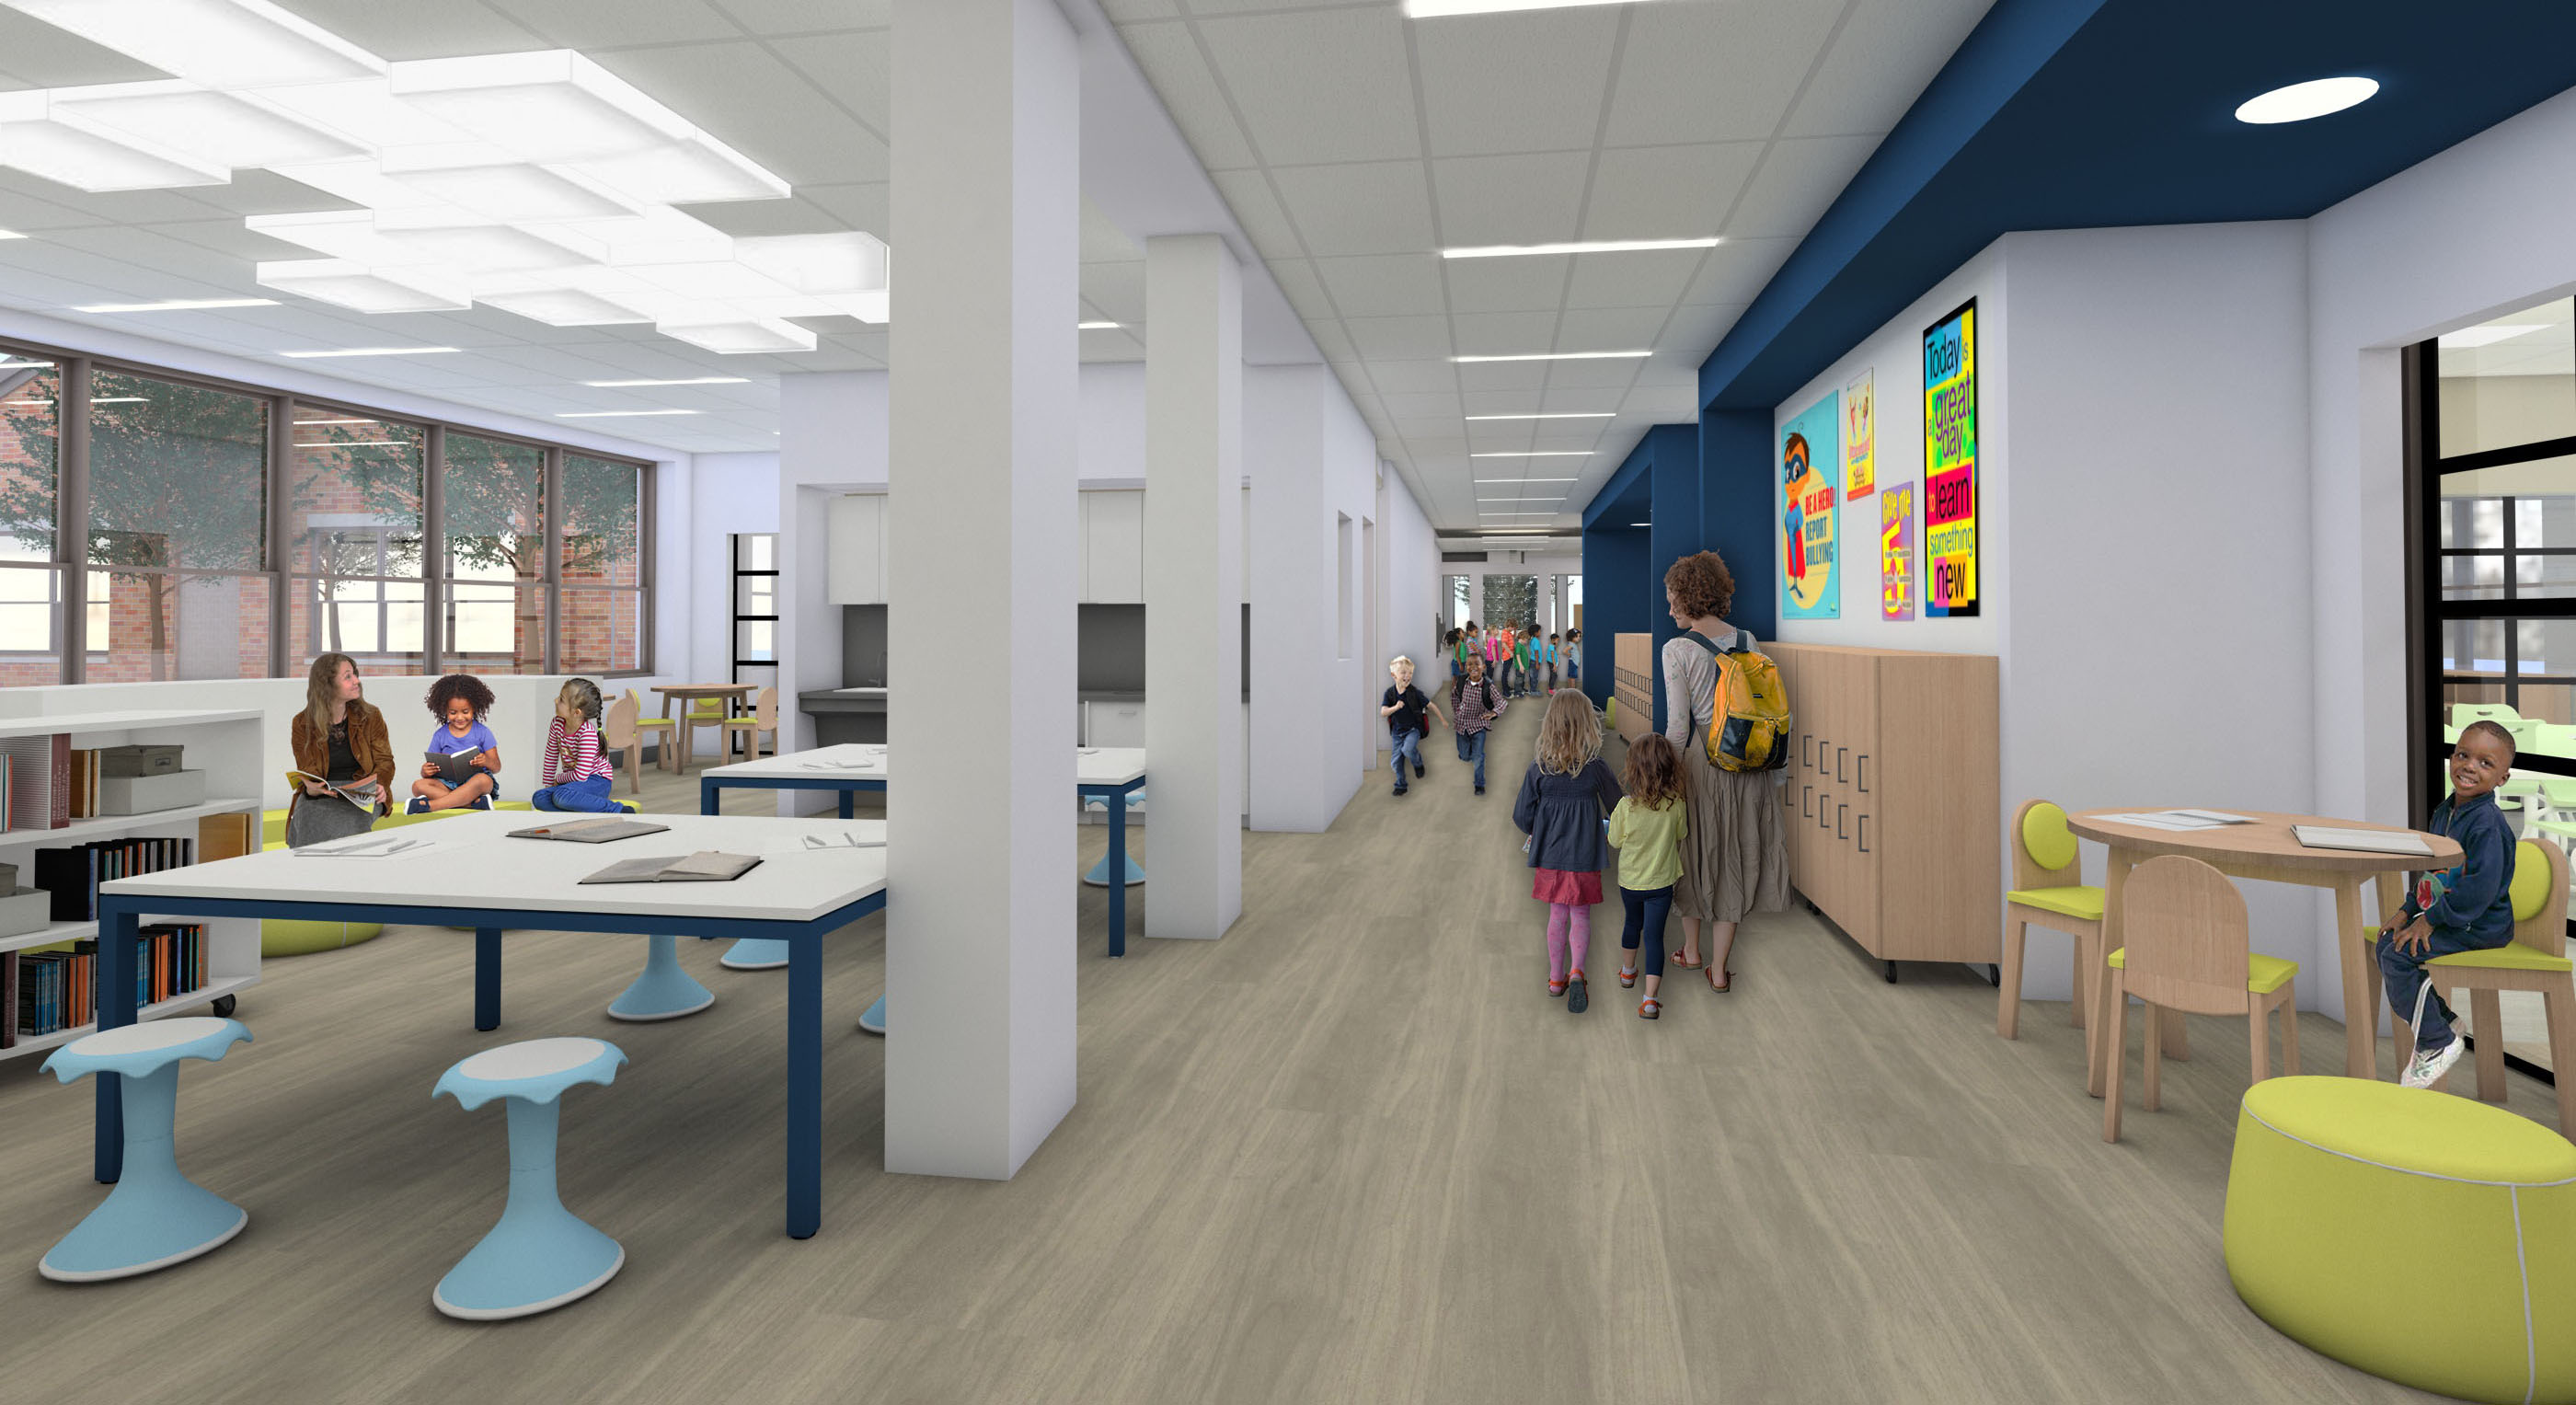 An interior rendering of a hallway with common space to the left and a classroom to the right